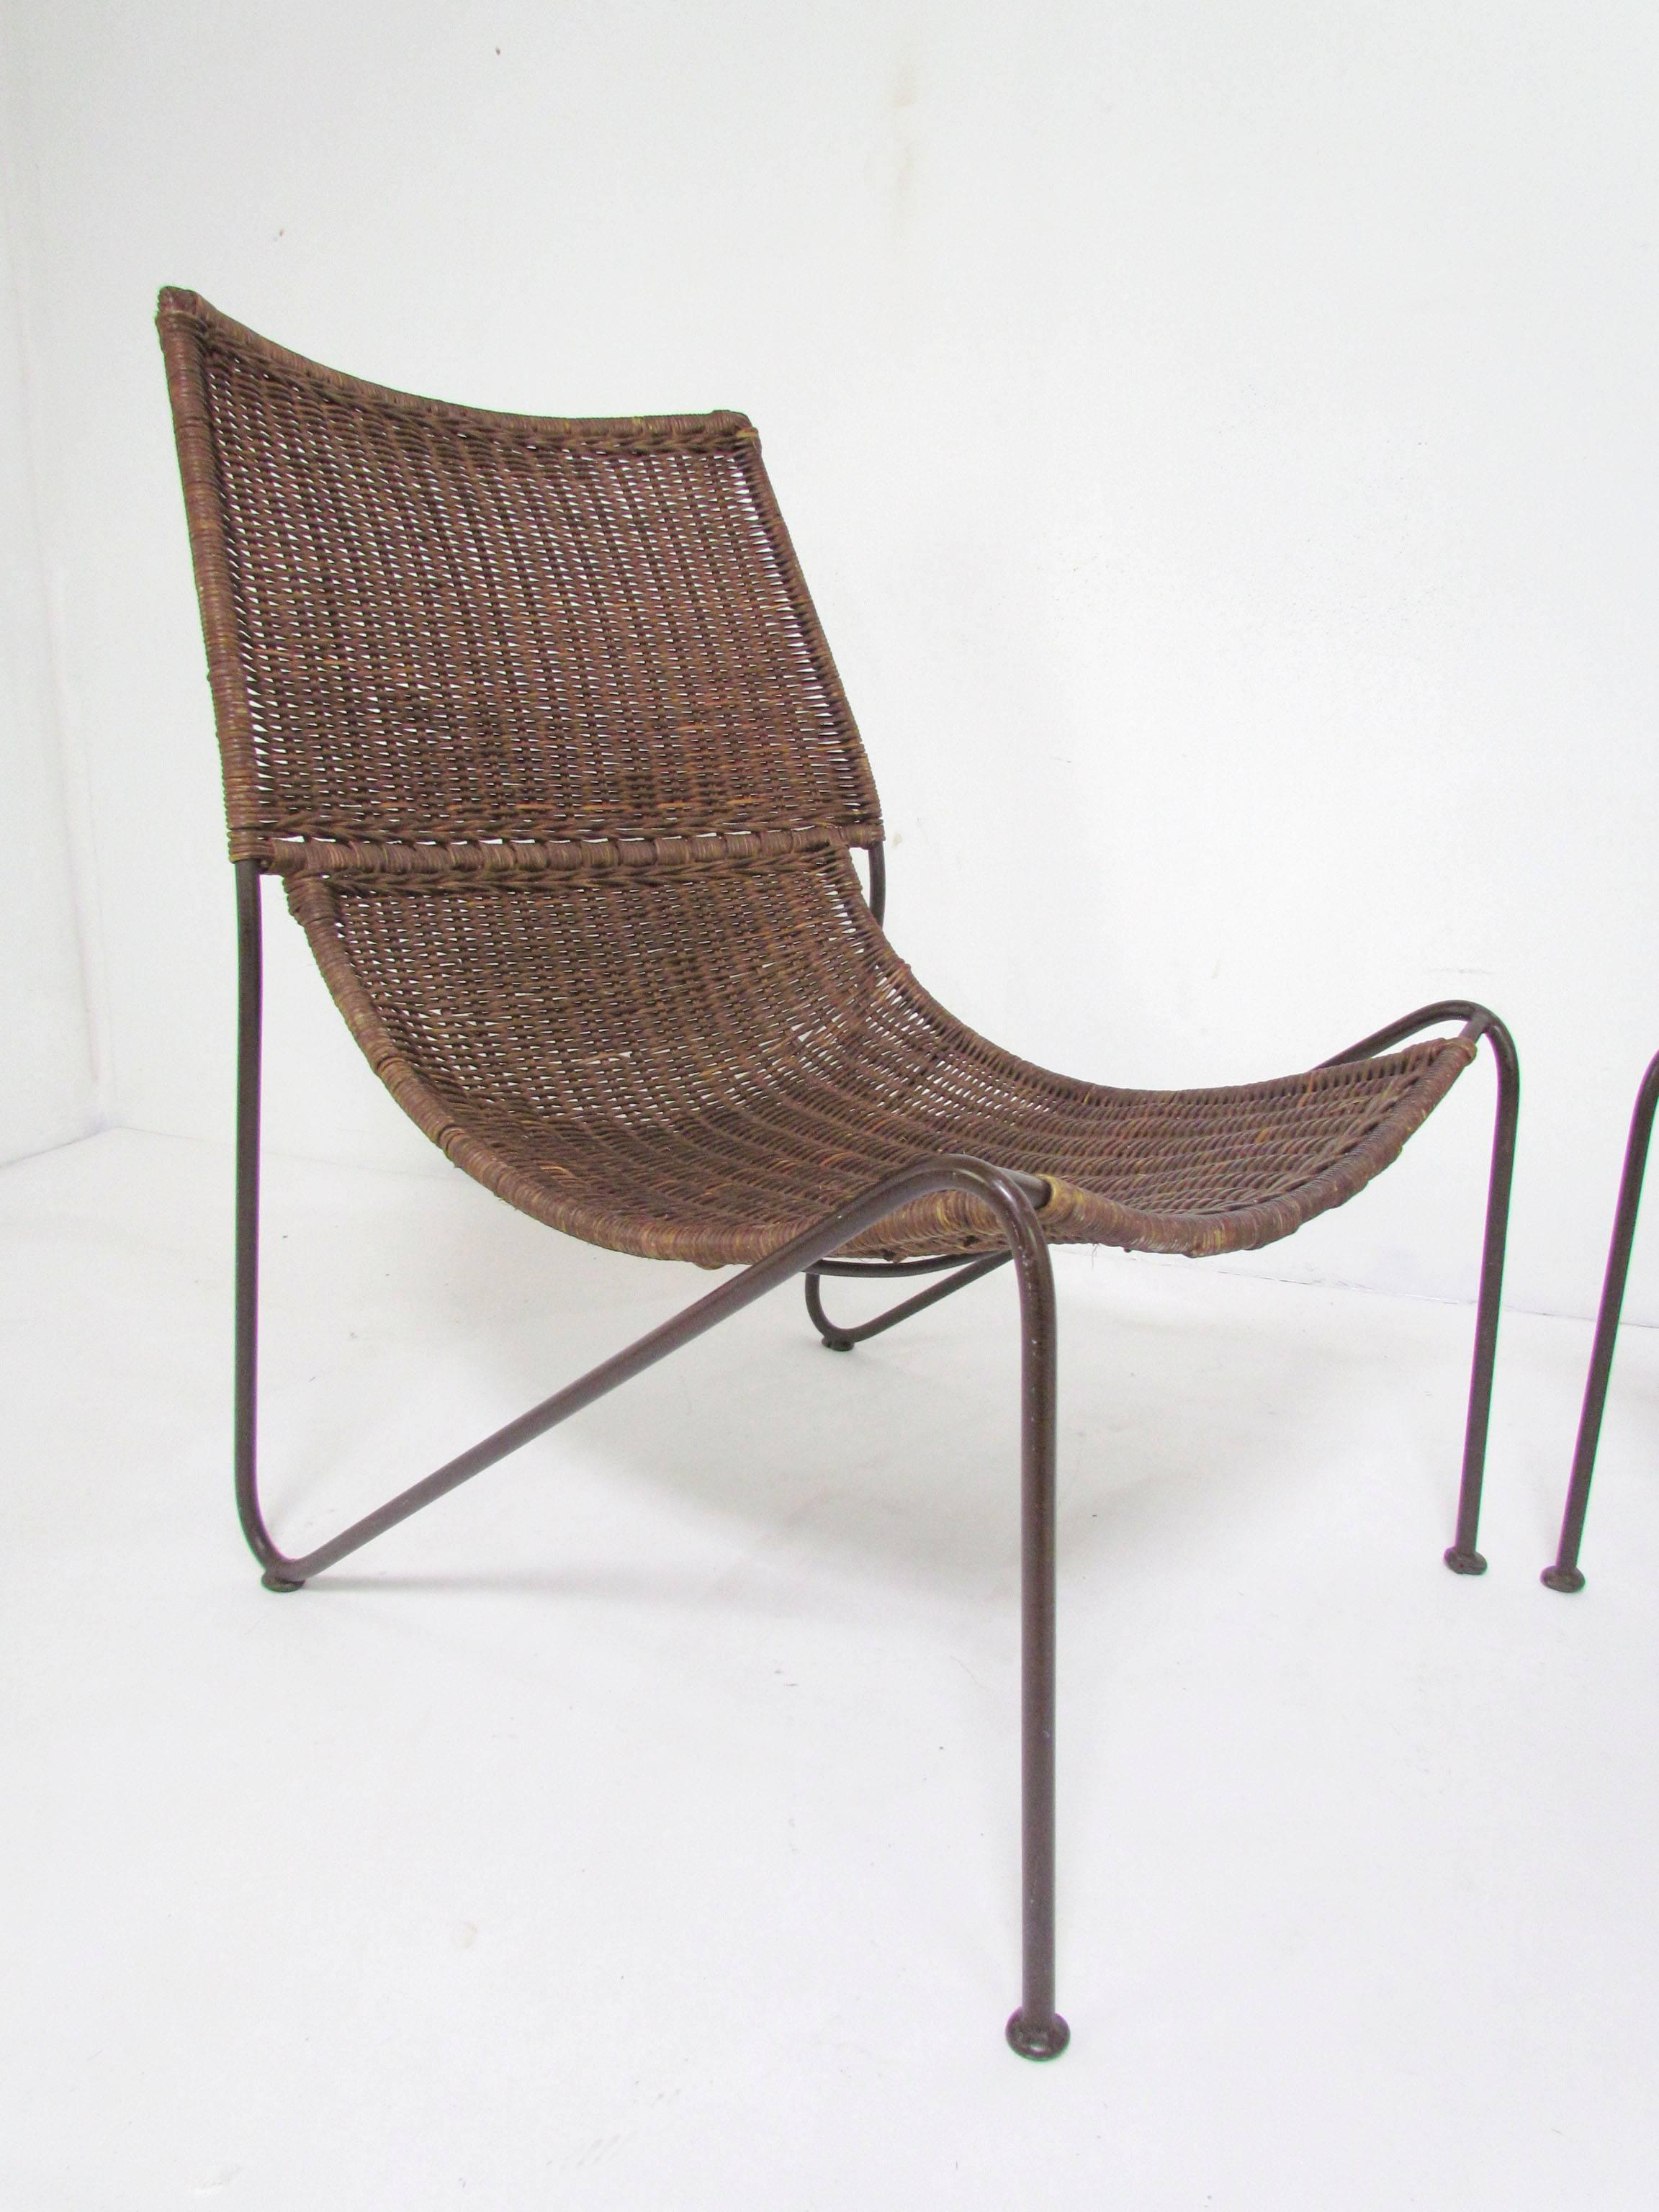 Pair of stylish lounge chairs in woven rattan and steel. Owing to their timeless design and surprisingly high degree of craftsmanship, these are often mis-attributed to Van Keppel and Green, Frederic Weinberg, and even Arthur Umanoff. Produced in